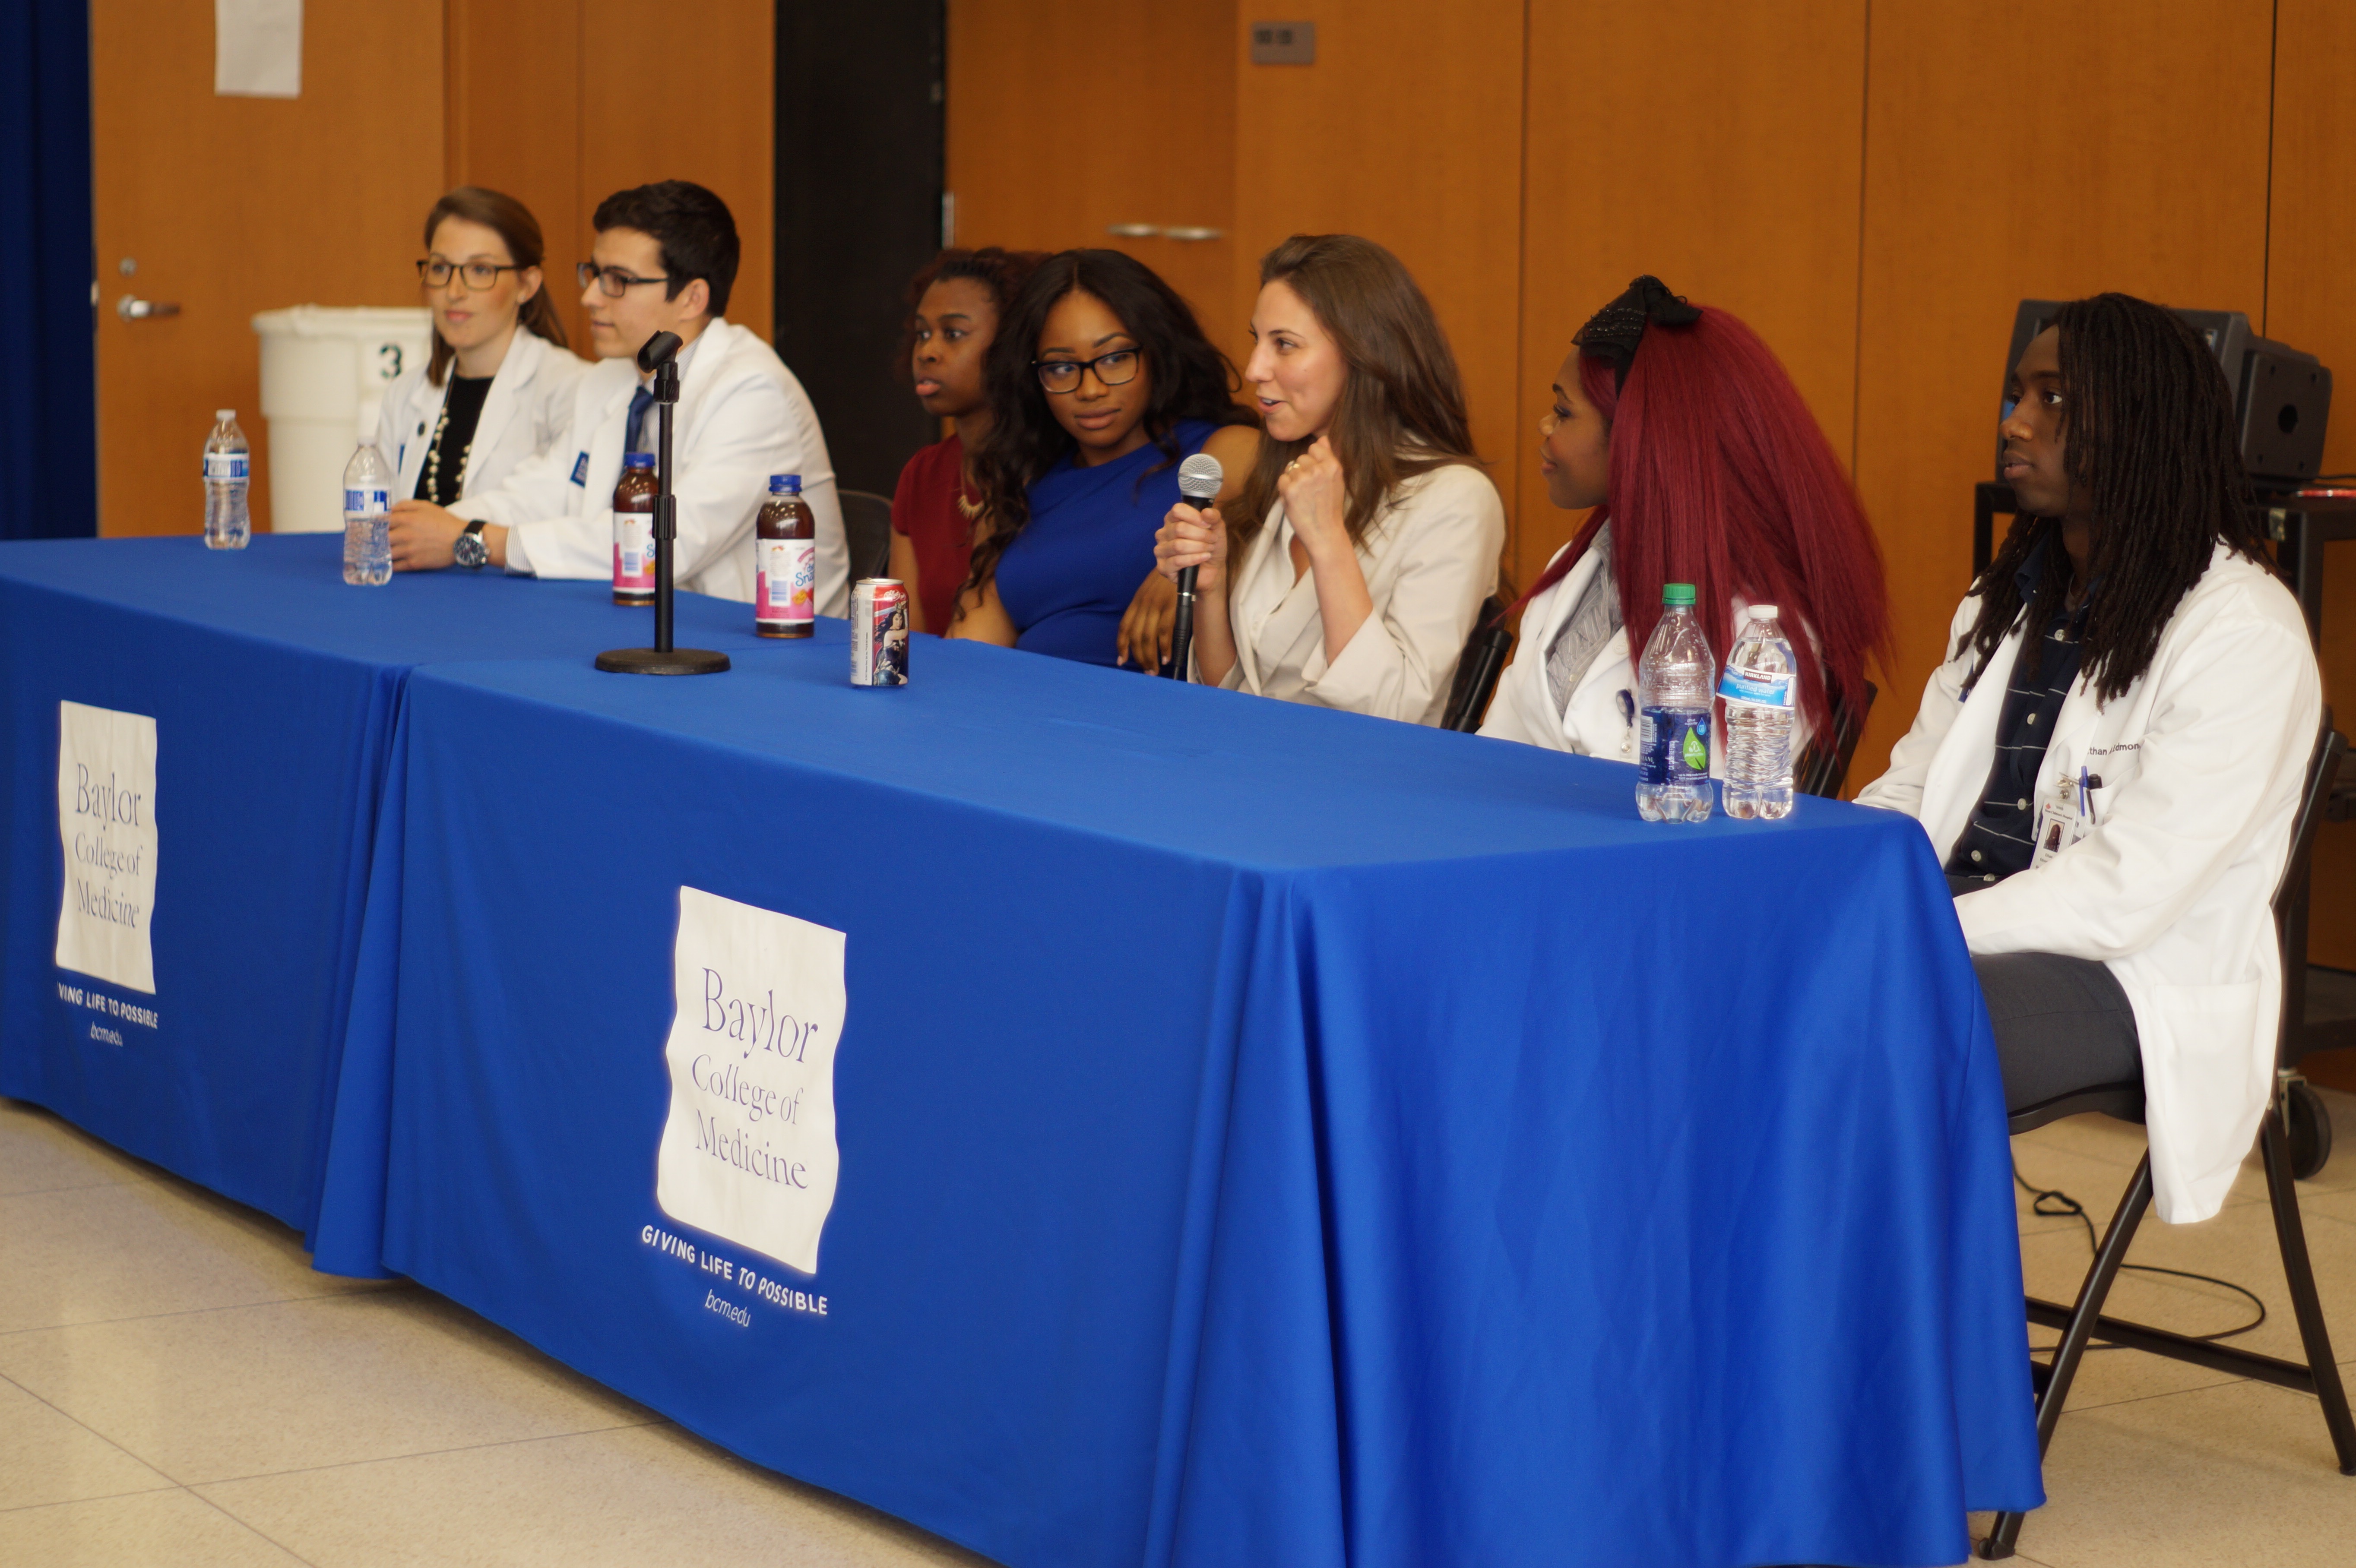 Panel of current medical school, biomedical science, and allied health science students offering advice for admission, academic success, wellness, and professional development.